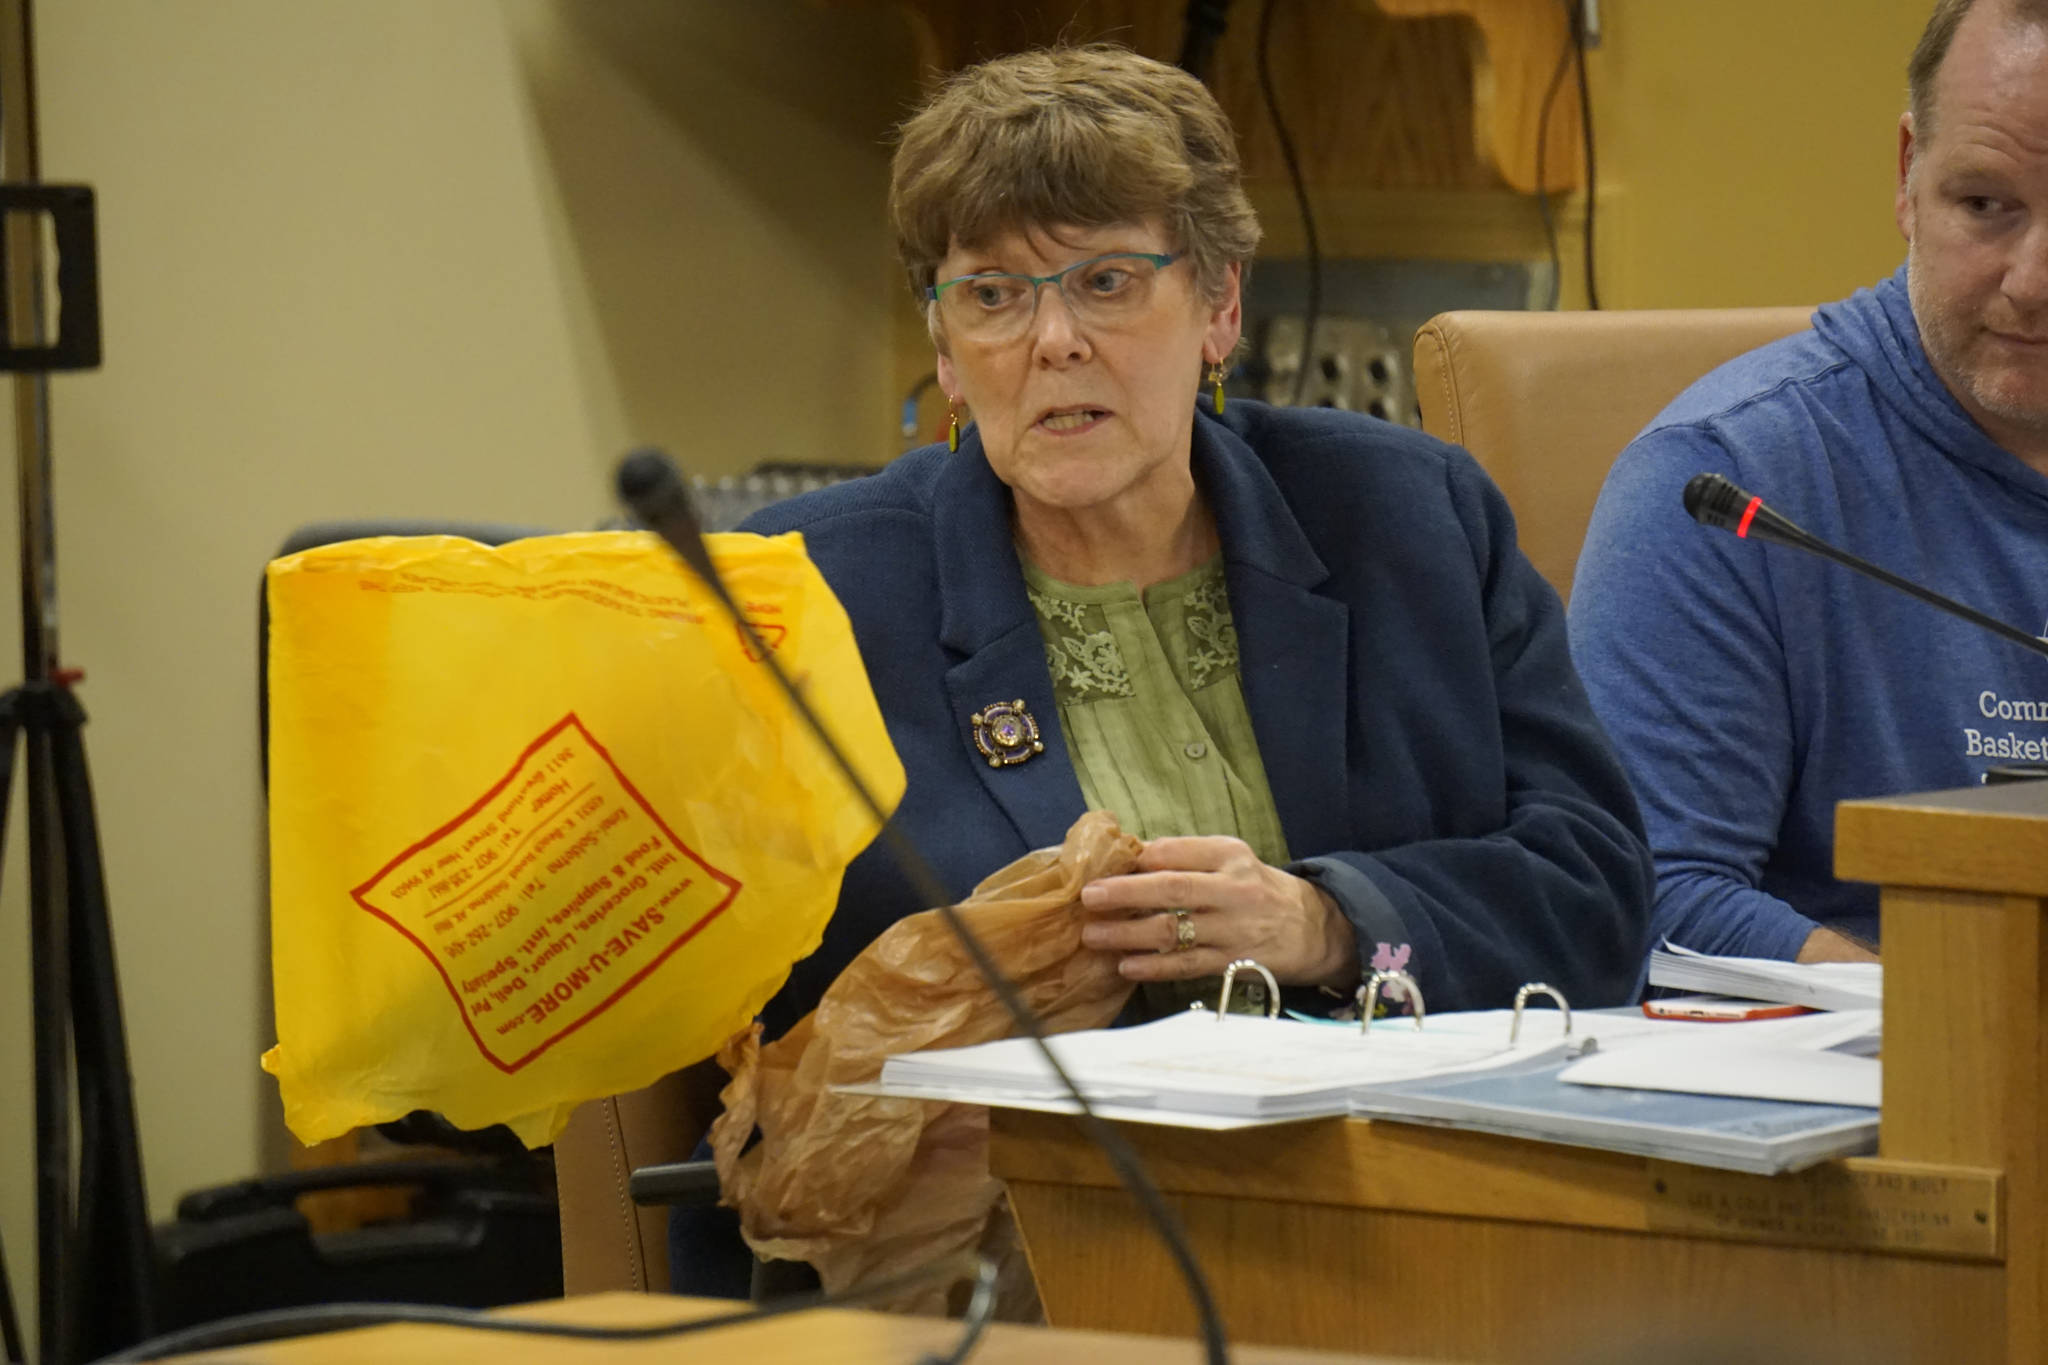 Homer City Council member Caroline Venuti compares a thicker plastic shopping bag, left, with a thinner, single-use plastic shopping bag, right, during an ordinance on a proposal to ban single-use plastic bags in Homer. The council approved an ordinance putting the question to the voters at the October 2019 city election. (Photo by Michael Armstrong/Homer News)